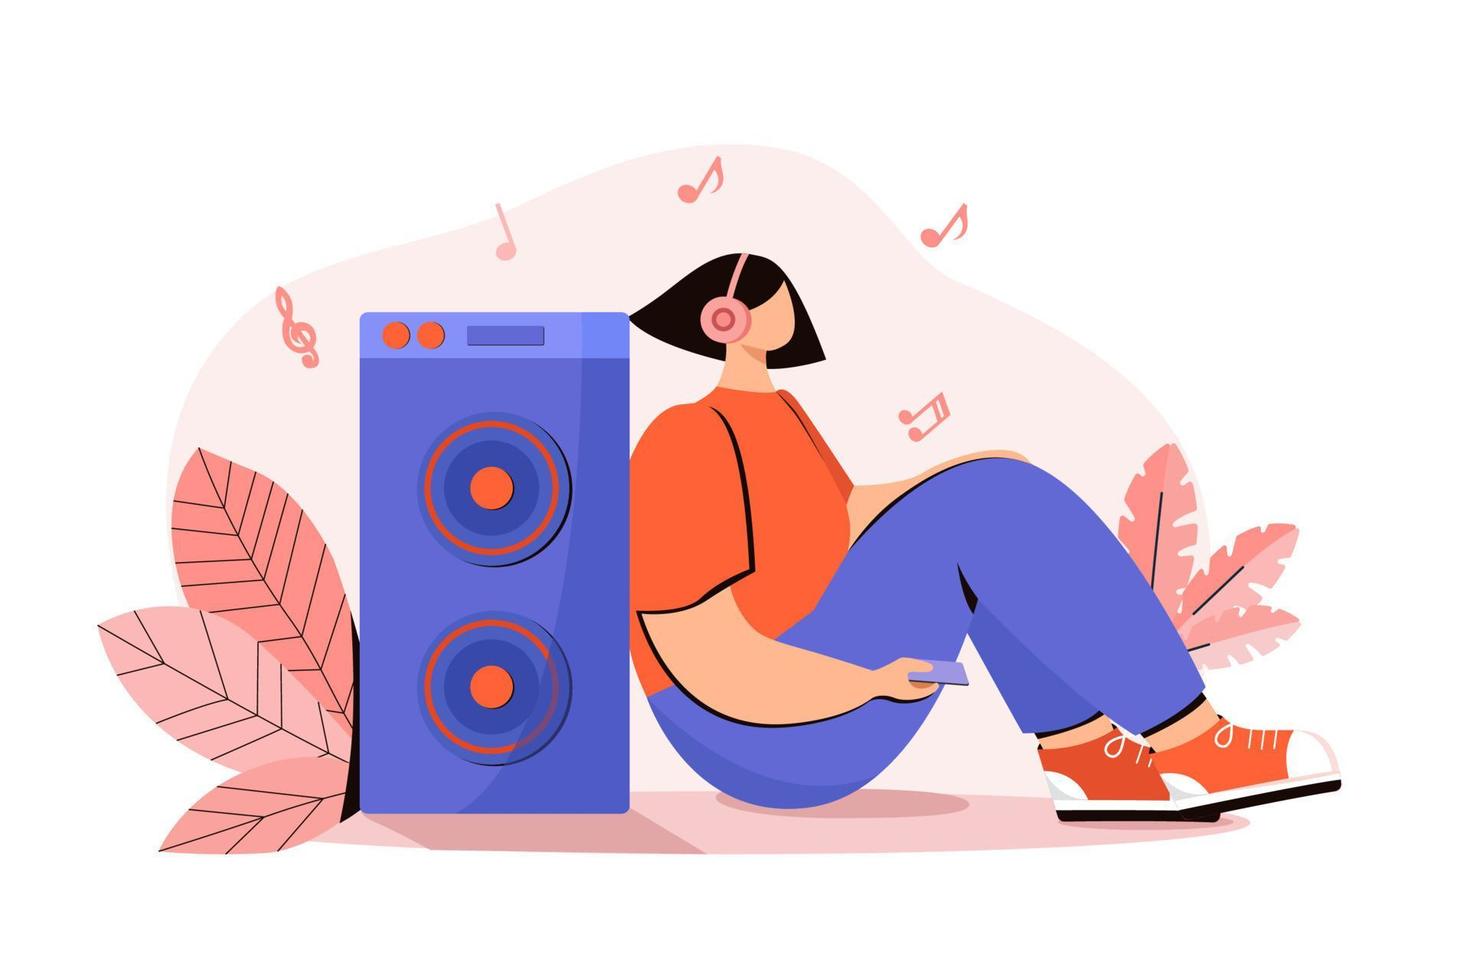 Radio Recorder Playing Music for the girl. Woman Listen to Song and Smiling. Sound Stereo Record Device Horizontal Flat Cartoon Vector Illustration